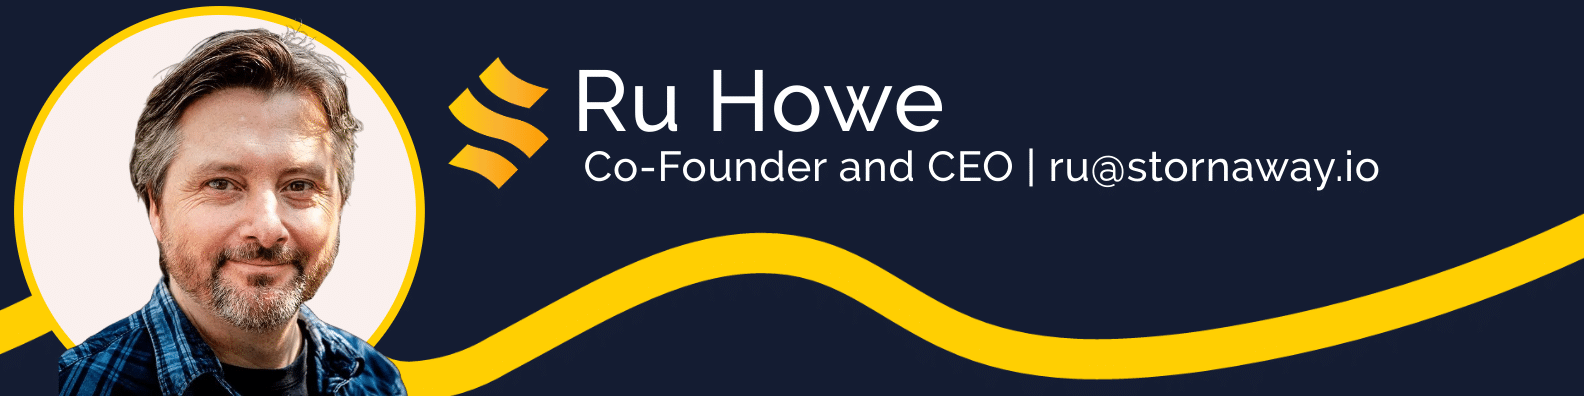 Ru Howe - Stornaway.io CEO and Co-Founder - a blue background with a beige circle, in front of this is a headshot of Ru - white male with facial hair and a blue chequered shirt, smiling. A yellow wavy line goes across the banner.